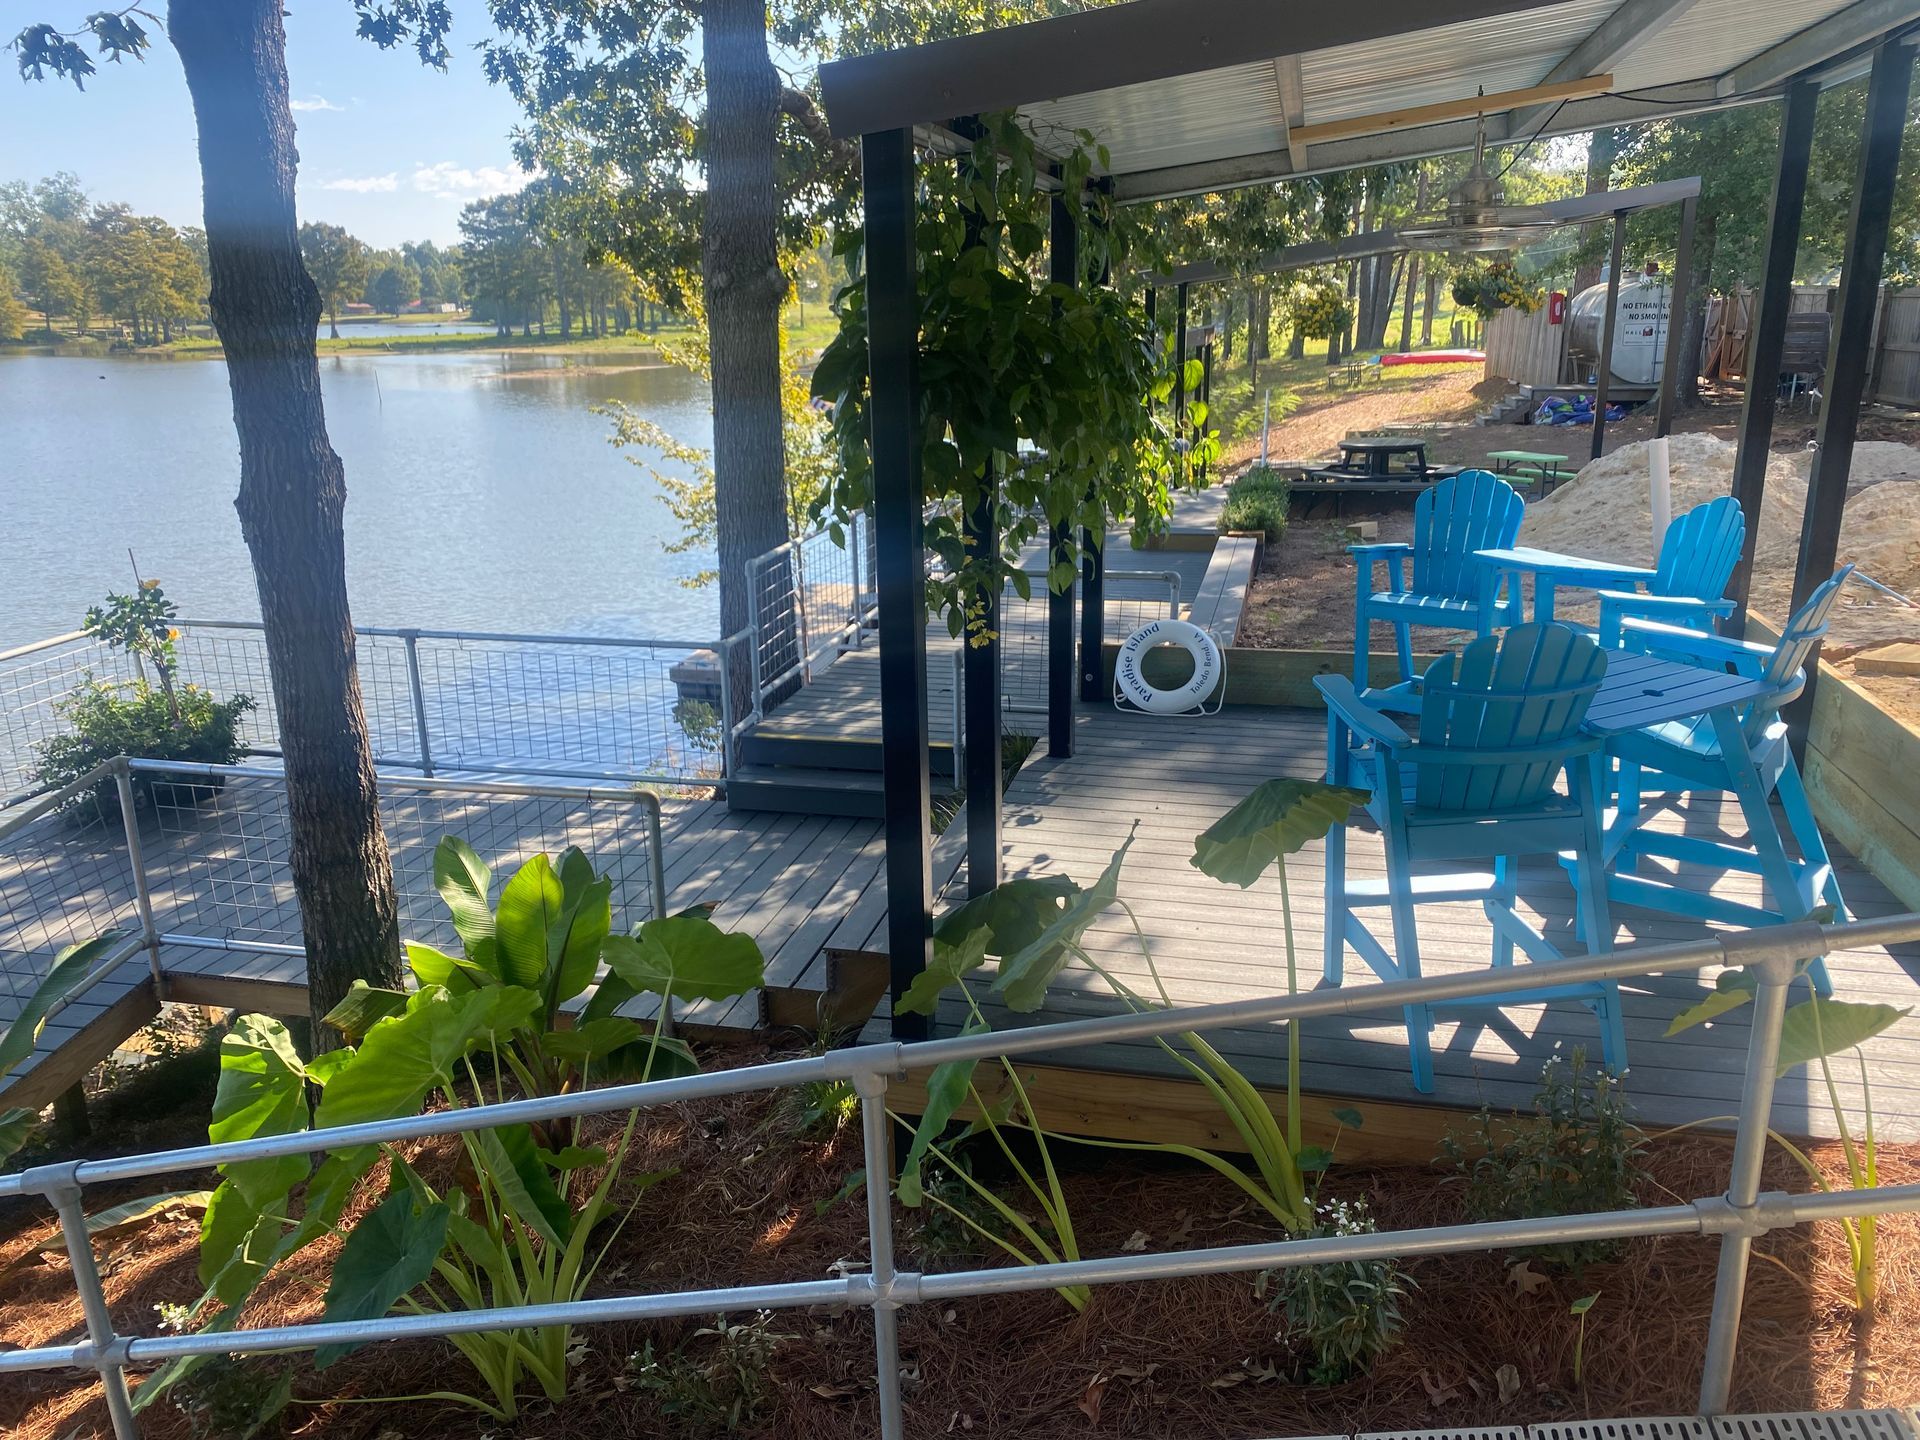 Secluded seating area at LTD Marina